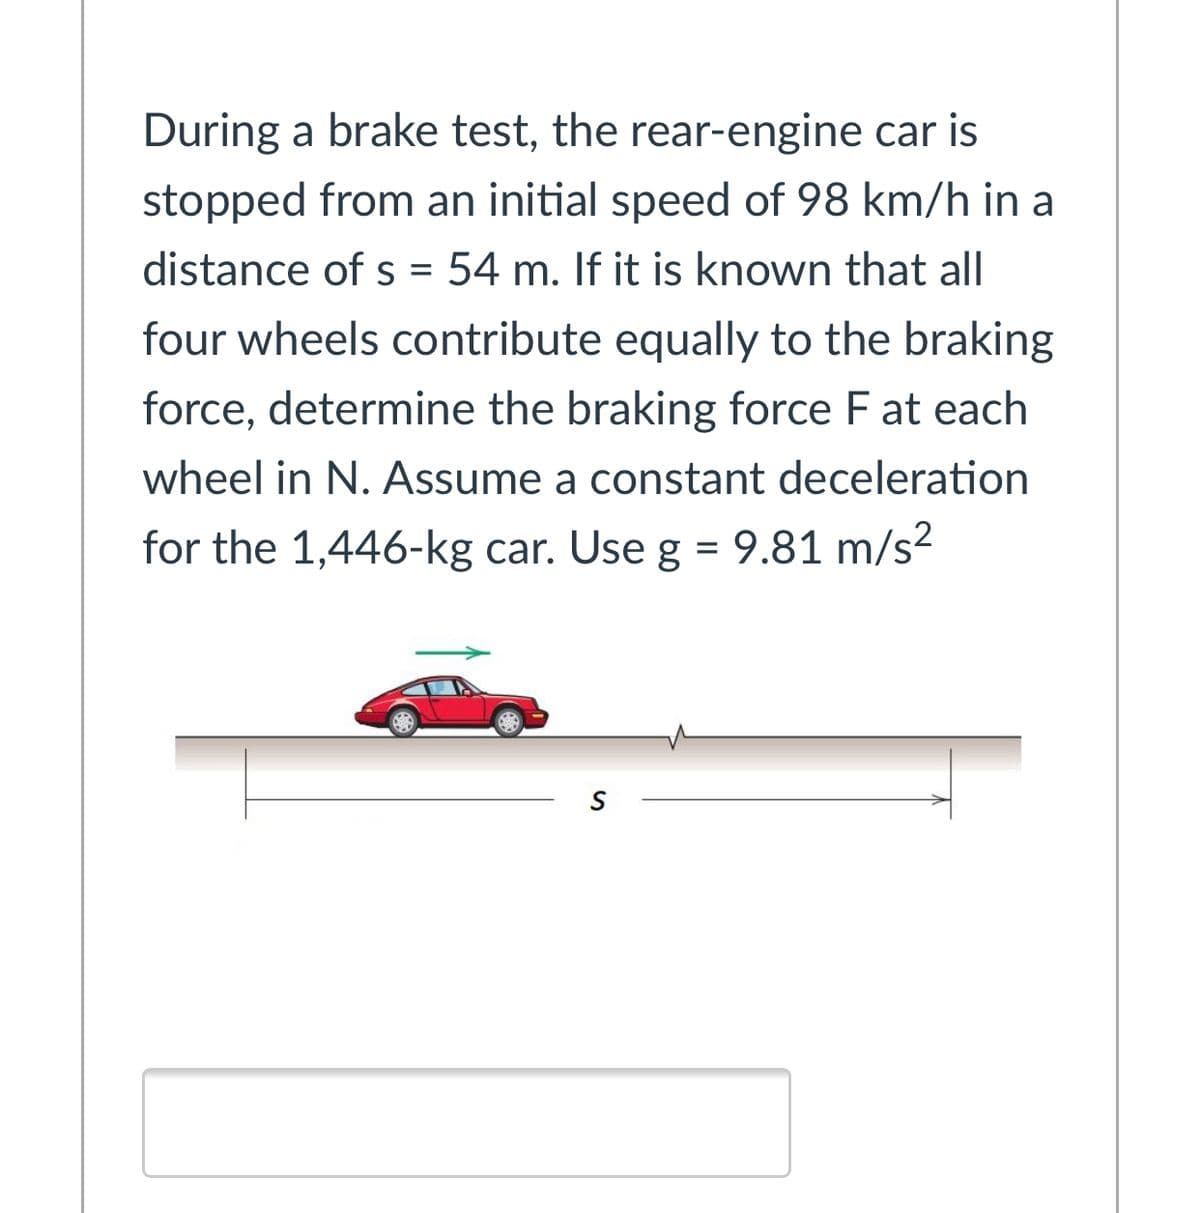 During a brake test, the rear-engine car is
stopped from an initial speed of 98 km/h in a
distance of s = 54 m. If it is known that all
four wheels contribute equally to the braking
force, determine the braking force F at each
wheel in N. Assume a constant deceleration
for the 1,446-kg car. Use g = 9.81 m/s?
